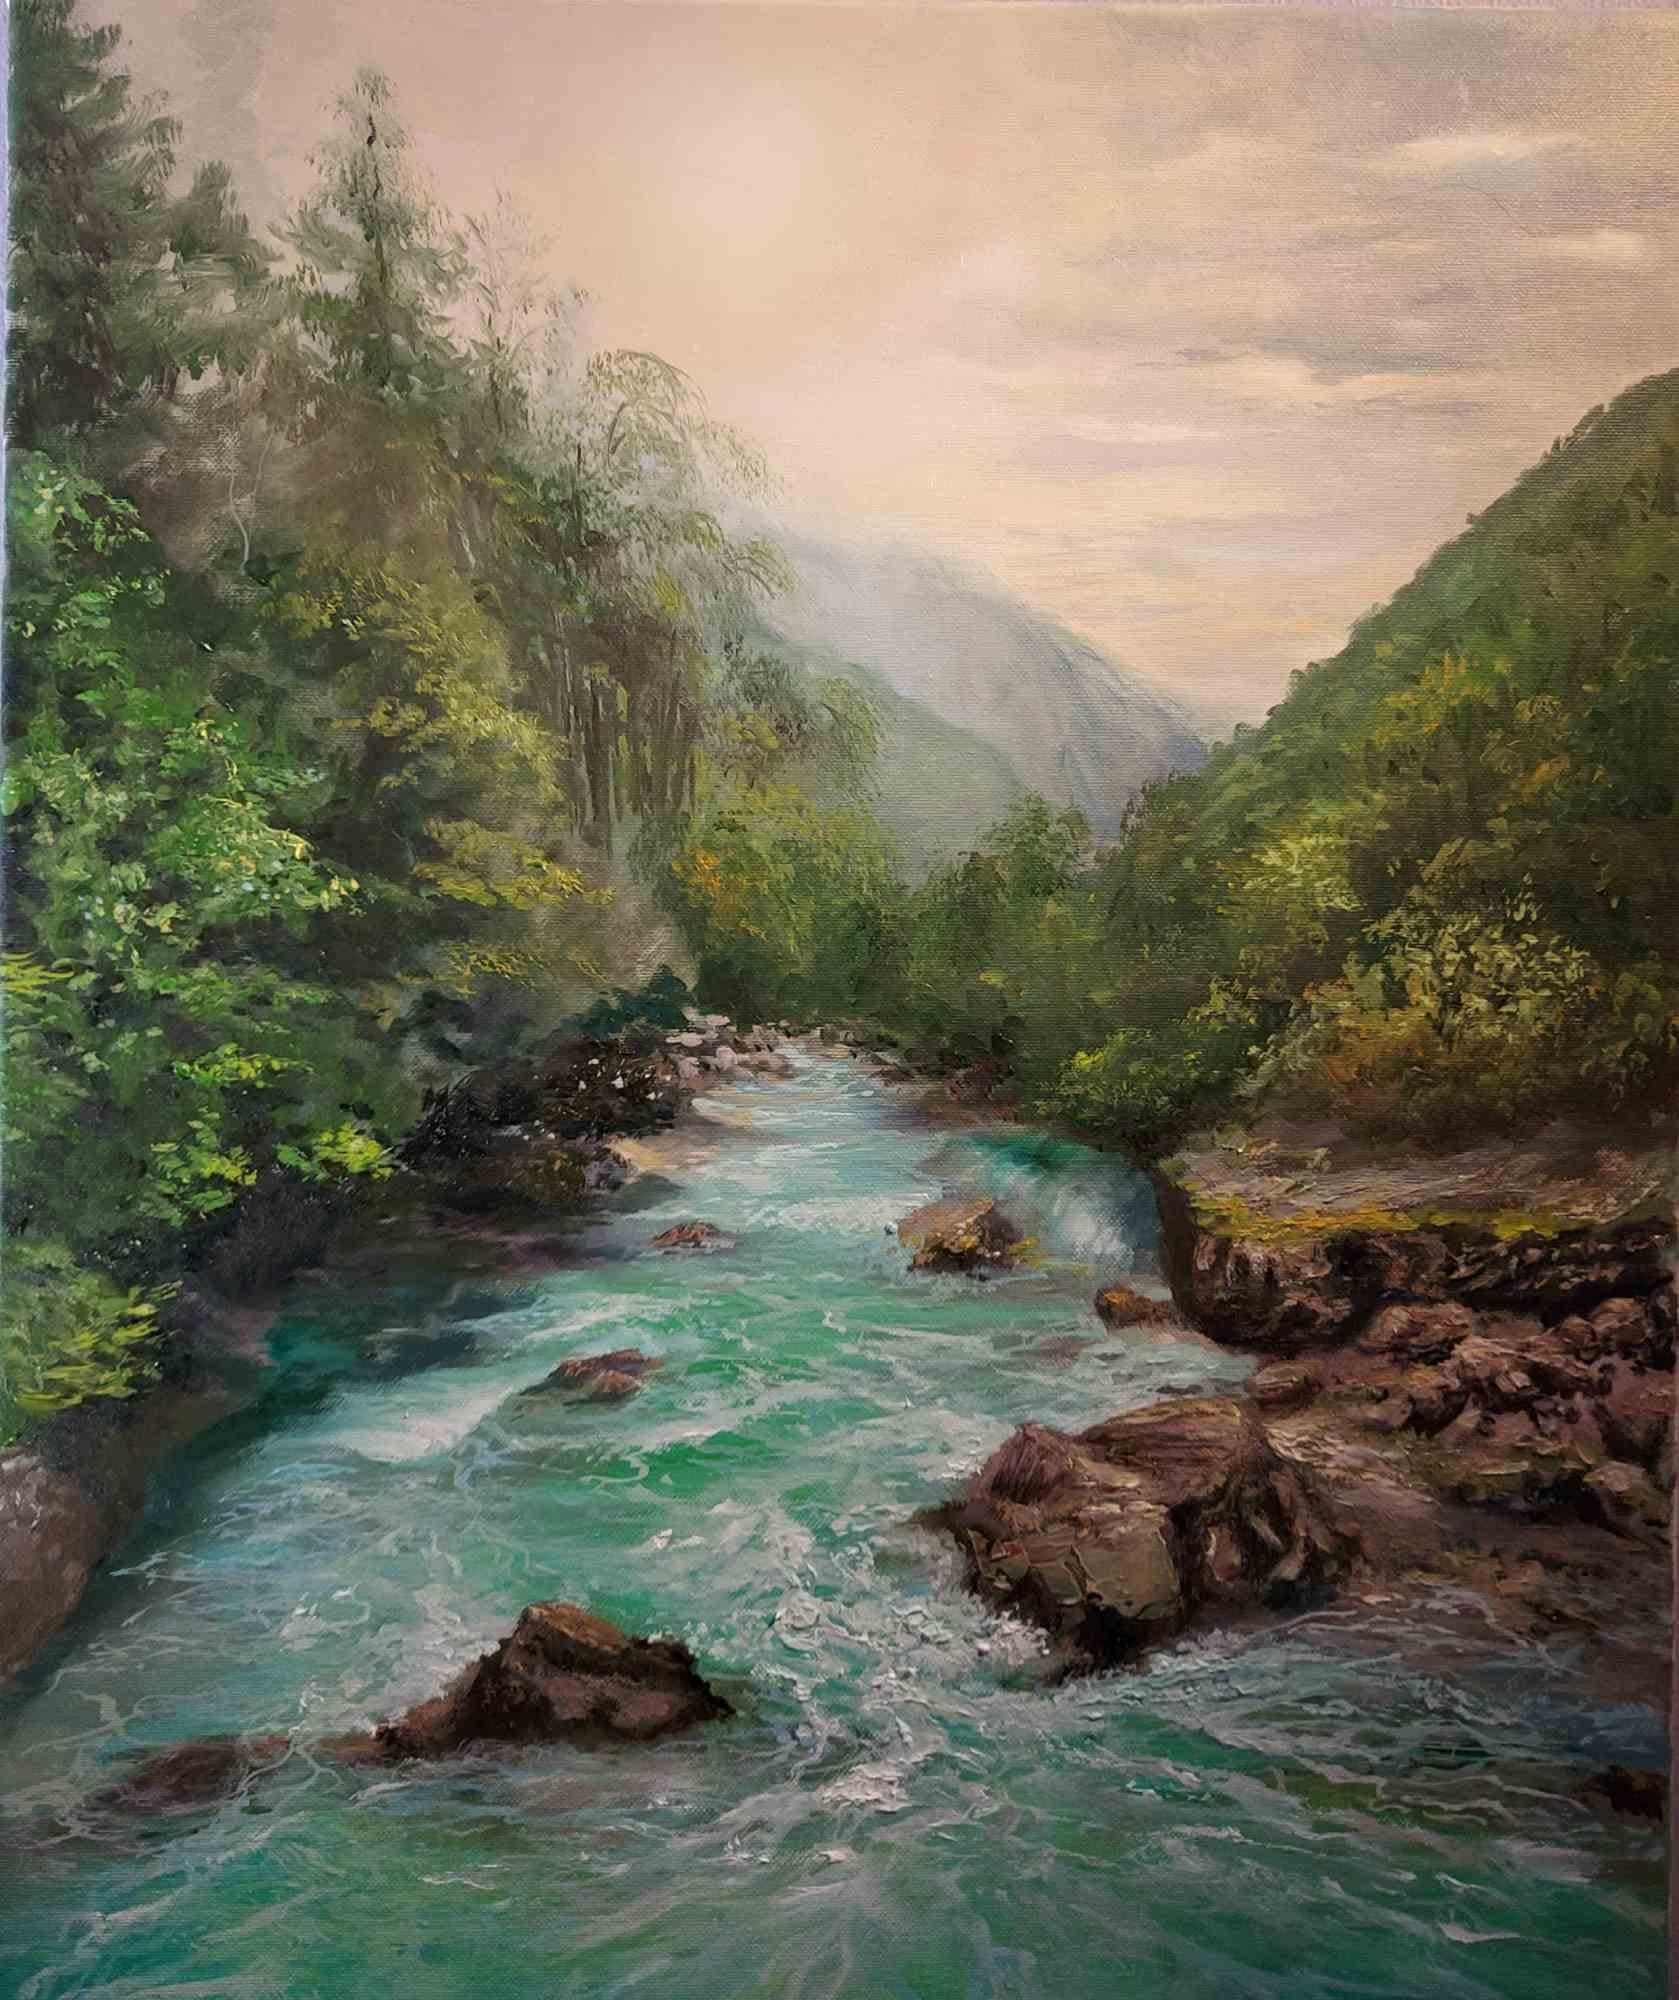 Original oil painting on canvas 60 x 50 cm, entitled RIVER.

It could remind the genuine untouched nature, could be somewhere in the North.